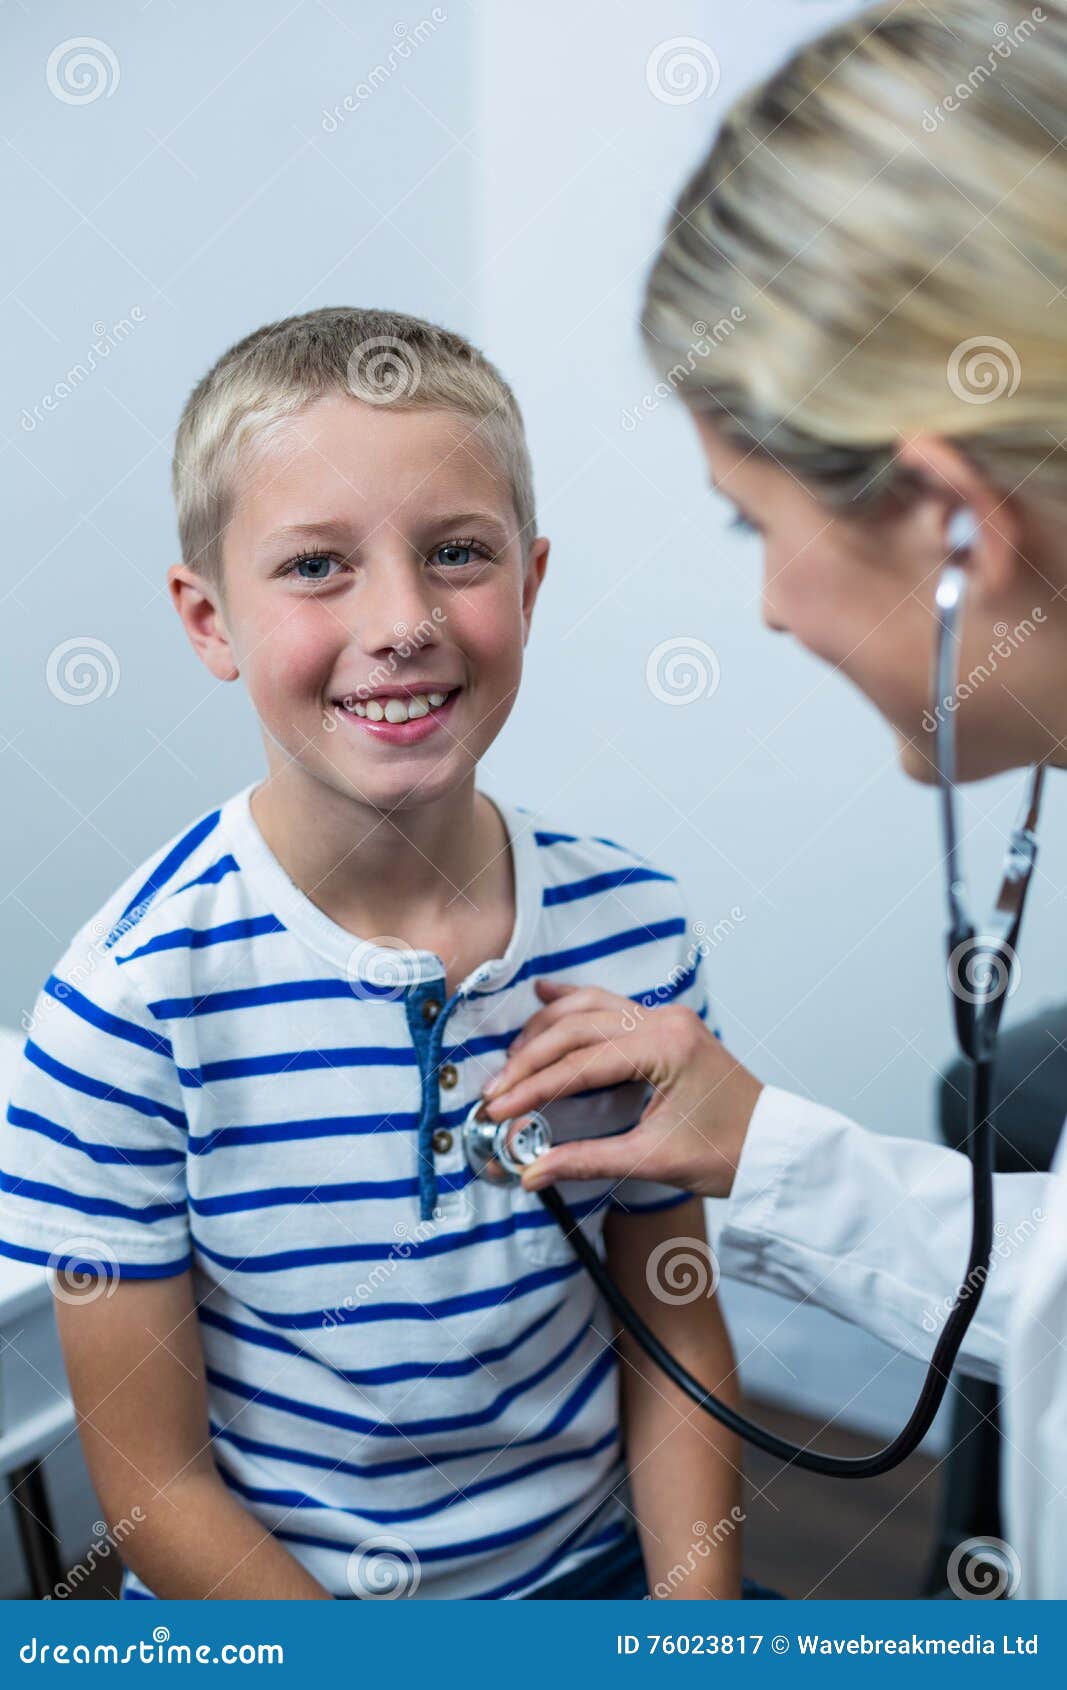 Doctor Examine Thyroid Male Patient Stock Image - Image of 